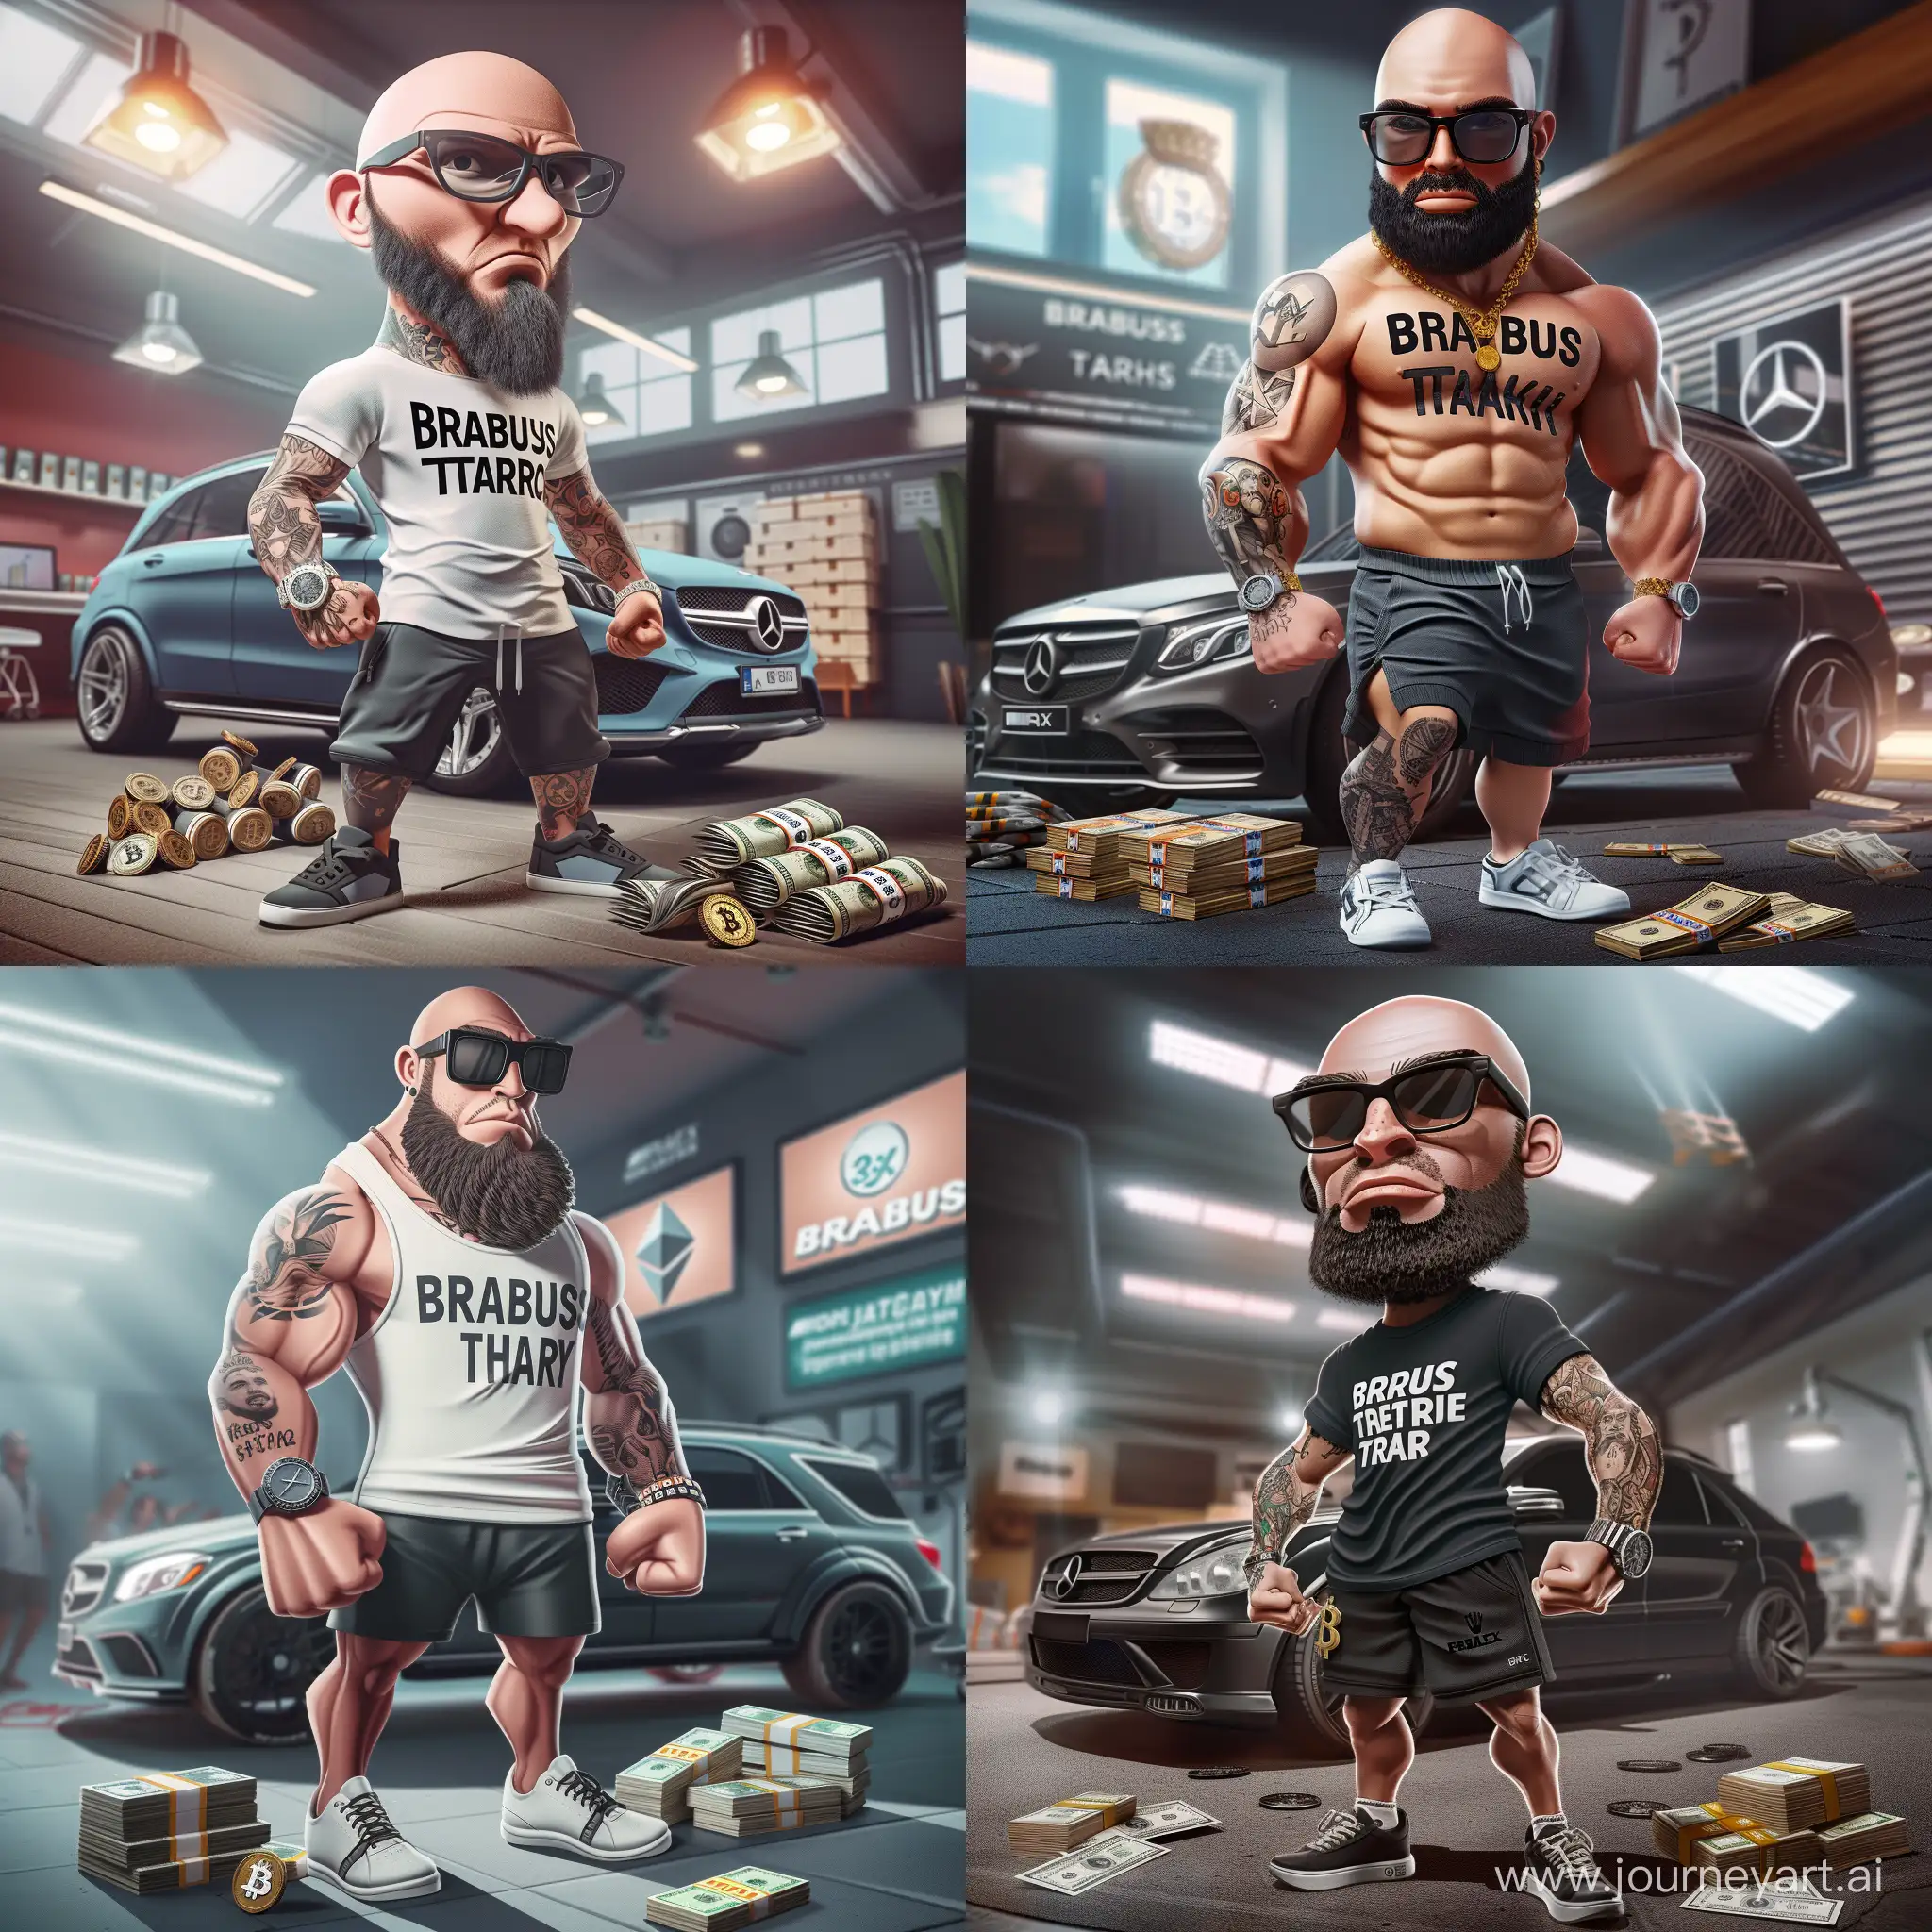 The man doesn't have a tattoo. The European man I am describing indicates his appearance and age in the region of 30 years and some items that he has with him.
He looks like a strong and pumped-up man, probably doing physical training.
He is wearing sneakers, shorts and a T-shirt with the inscription "Brabus Trade".
He also has a small, heavily black beard and a bald head. He has a Rolex watch on his hand, and he wears dark glasses, behind which his eyes are not visible at all.



The crypto exchange is visible in the background.

The car (necessarily a brabus) indicates that it is a Mercedes Brabus, which is an SUV.
There are bundles of dollars on the floor next to the man. The overall picture implies that this man is successful and wealthy, interested in investments and cryptocurrency. The whole picture is in the style of 3d cartoons.